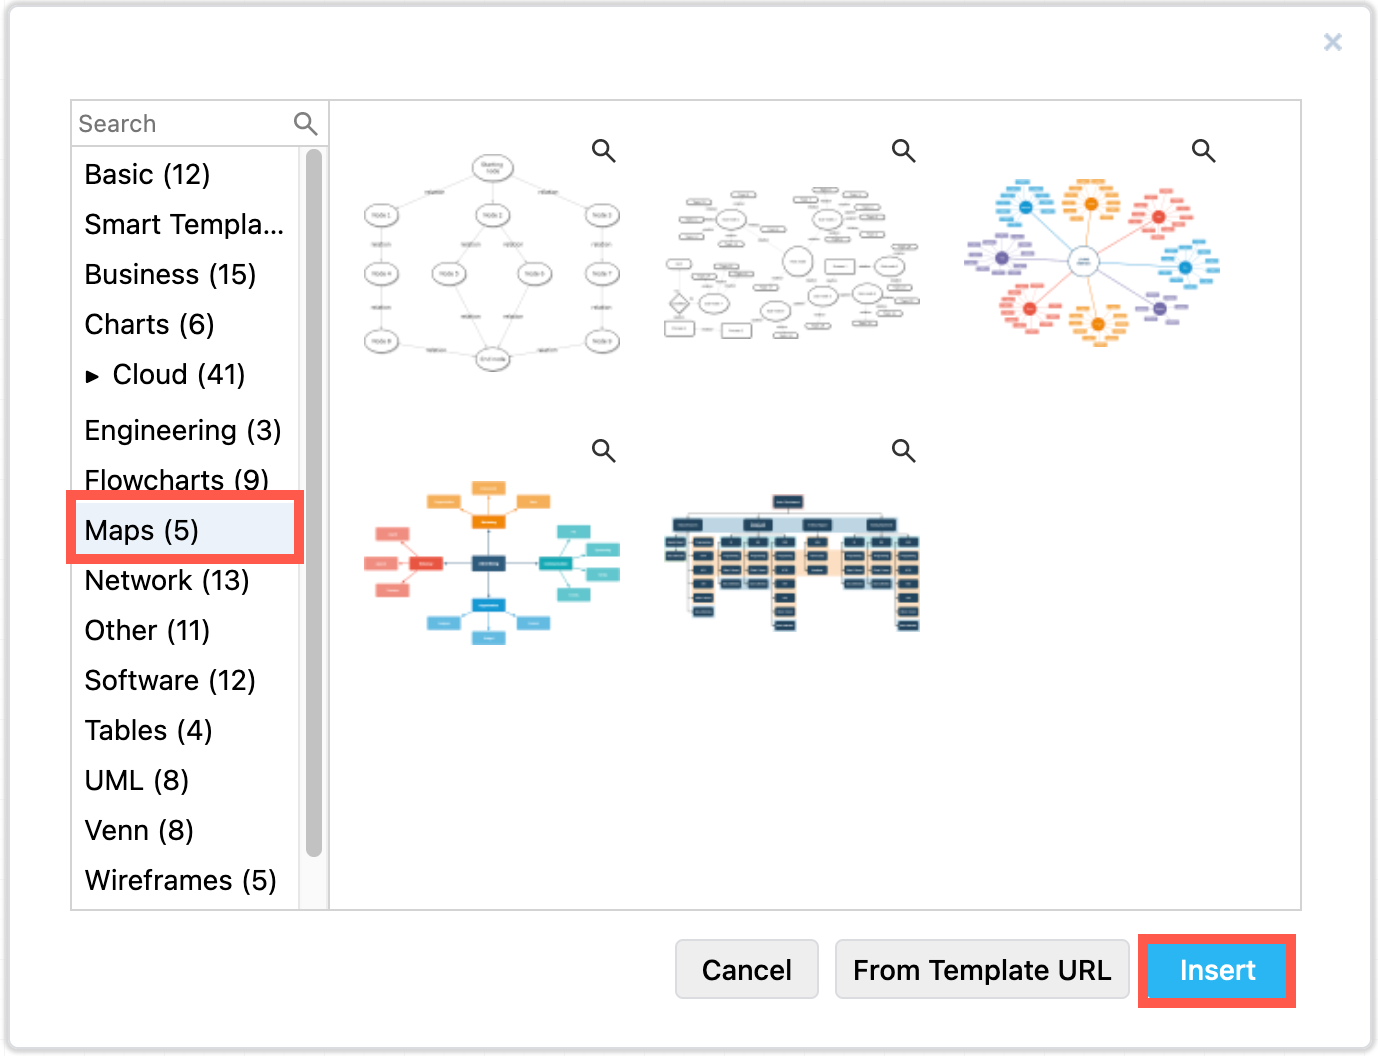 Use the draw.io map templates to create a mindmap in an online whiteboard in Confluence